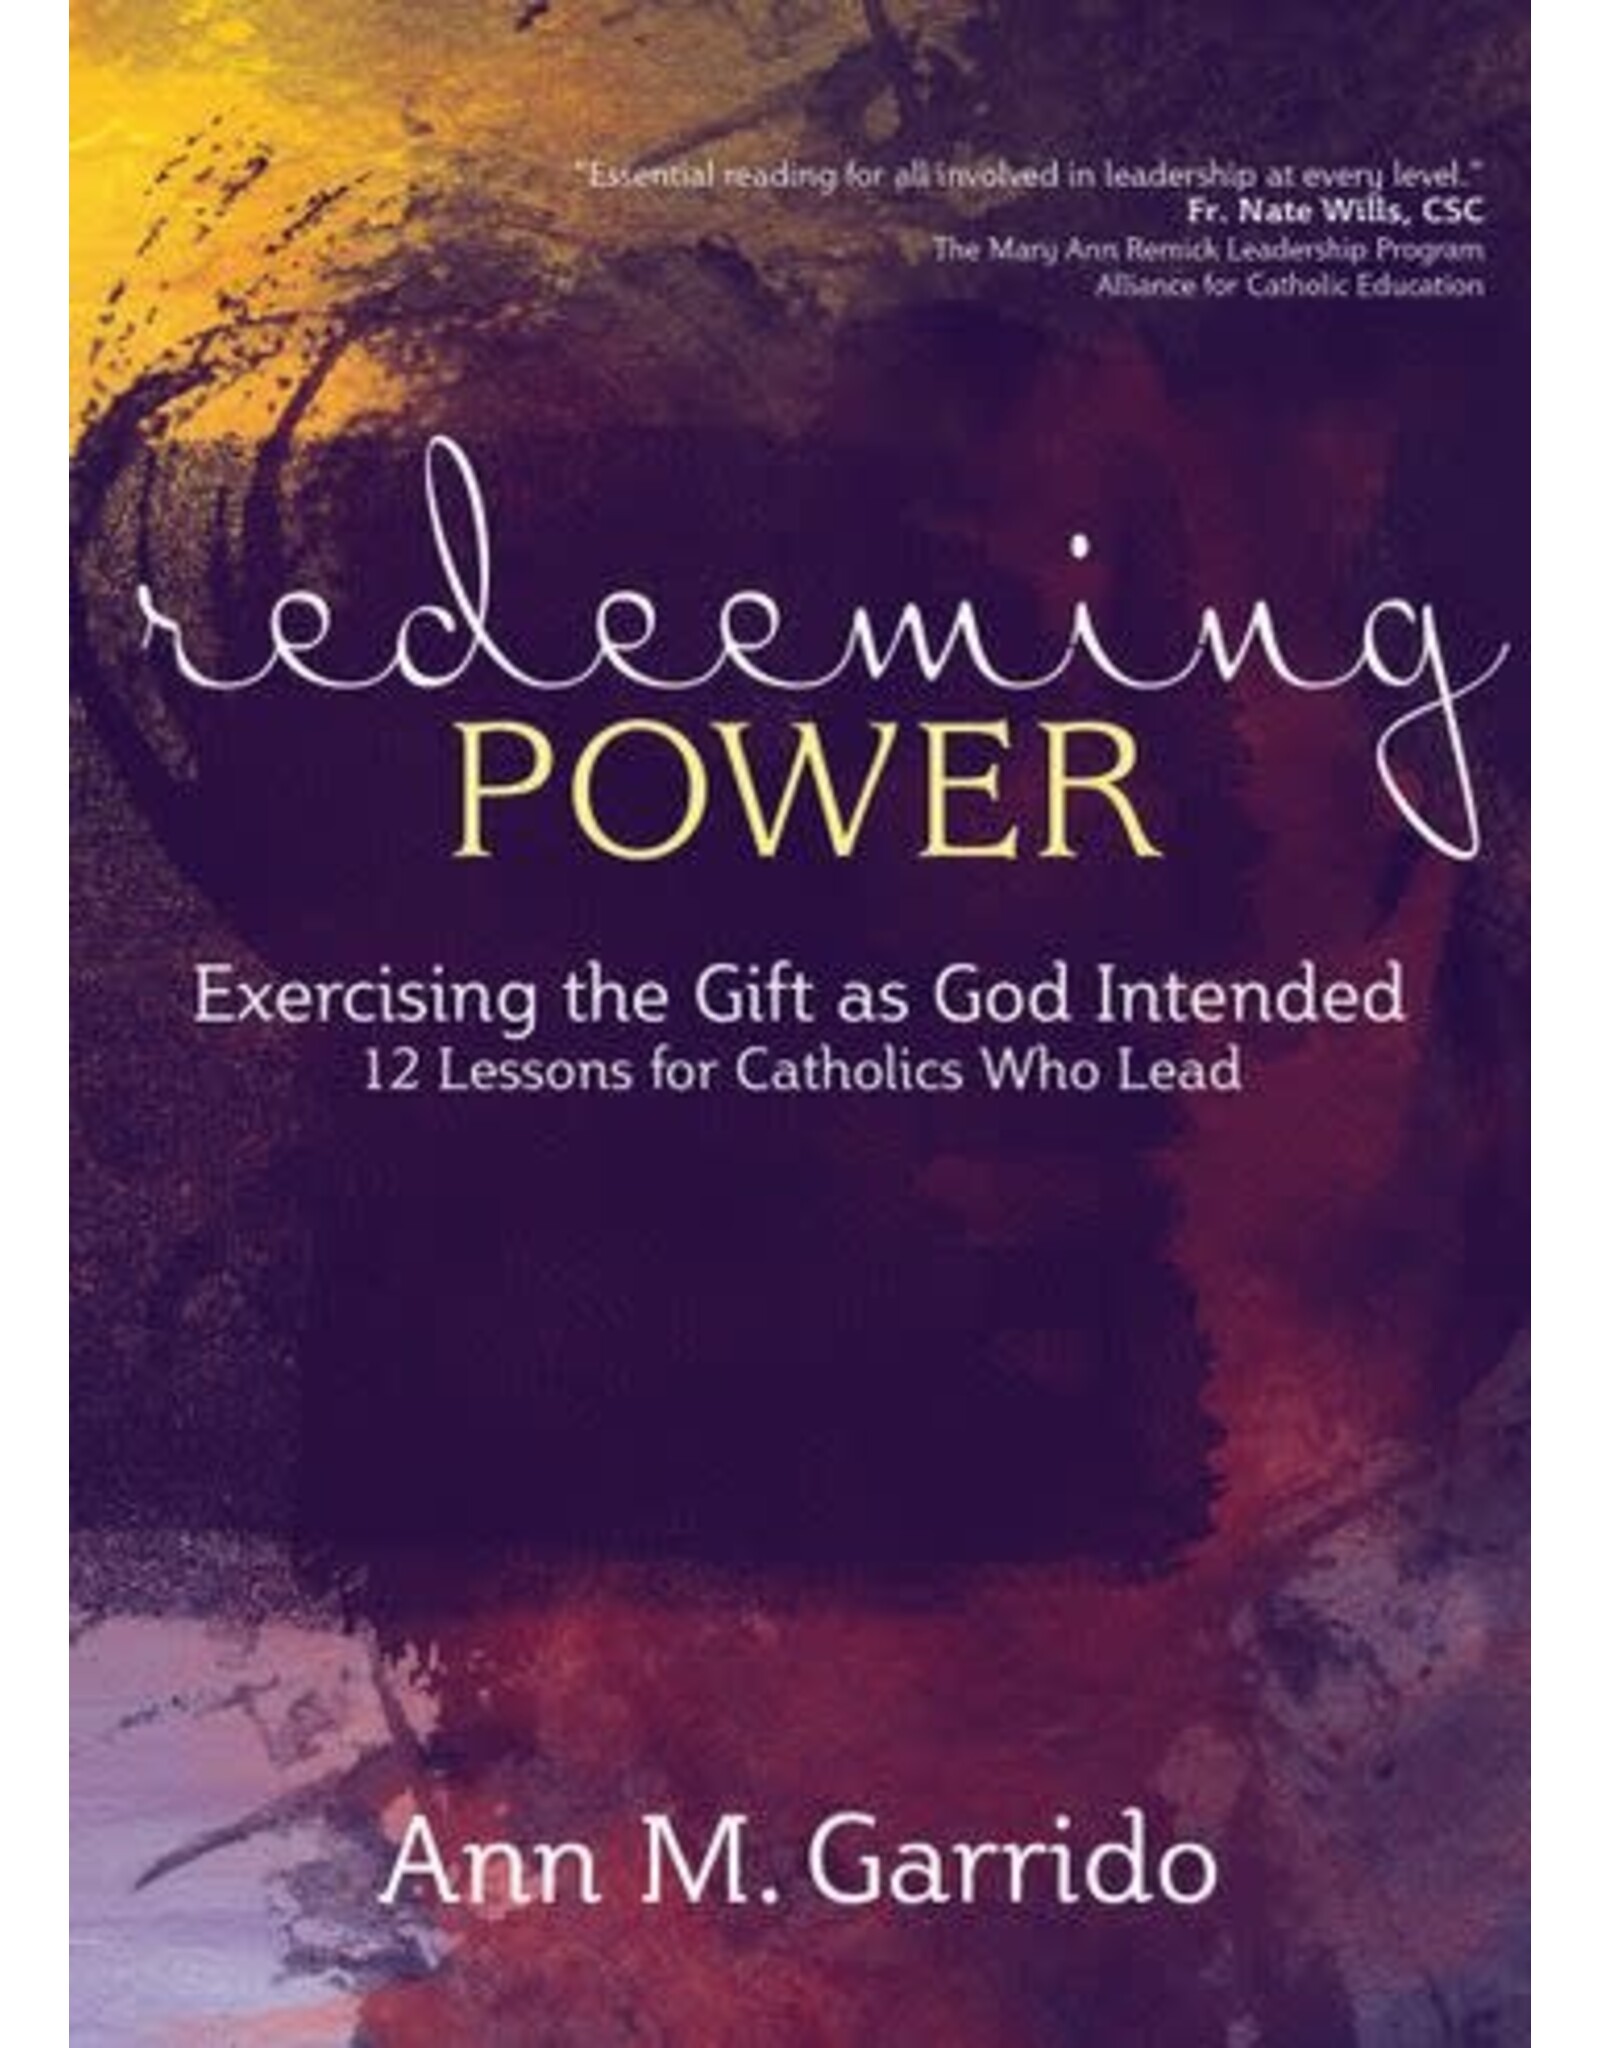 Ave Maria Redeeming Power: Exercising the Gift as God Intended